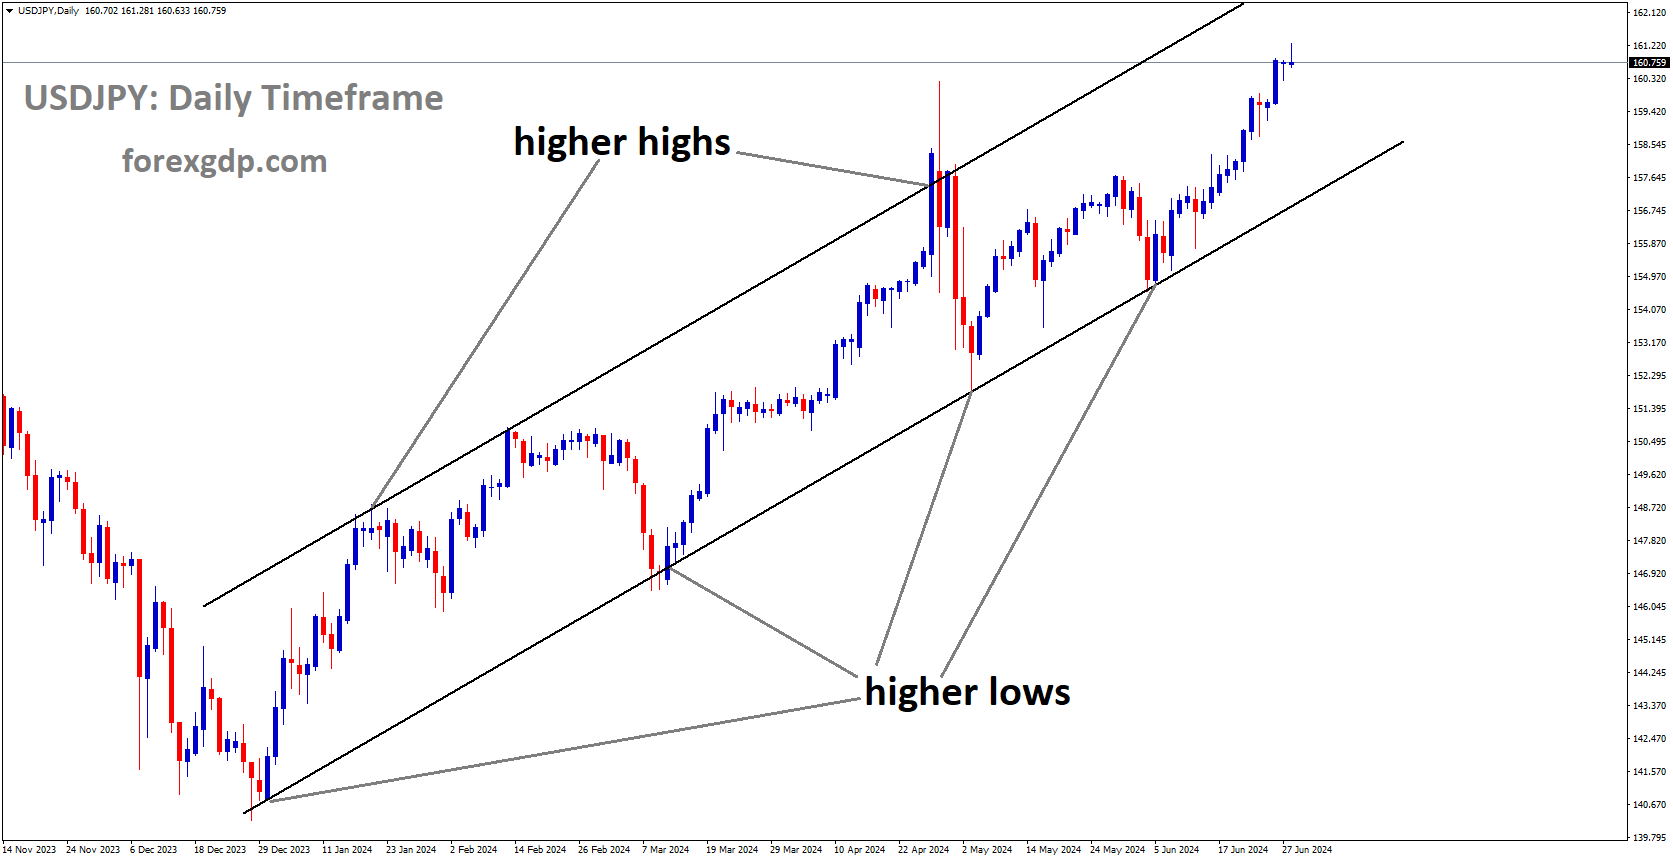 USDJPY is moving in Ascending channel and market has rebounded from the higher low area of the channel